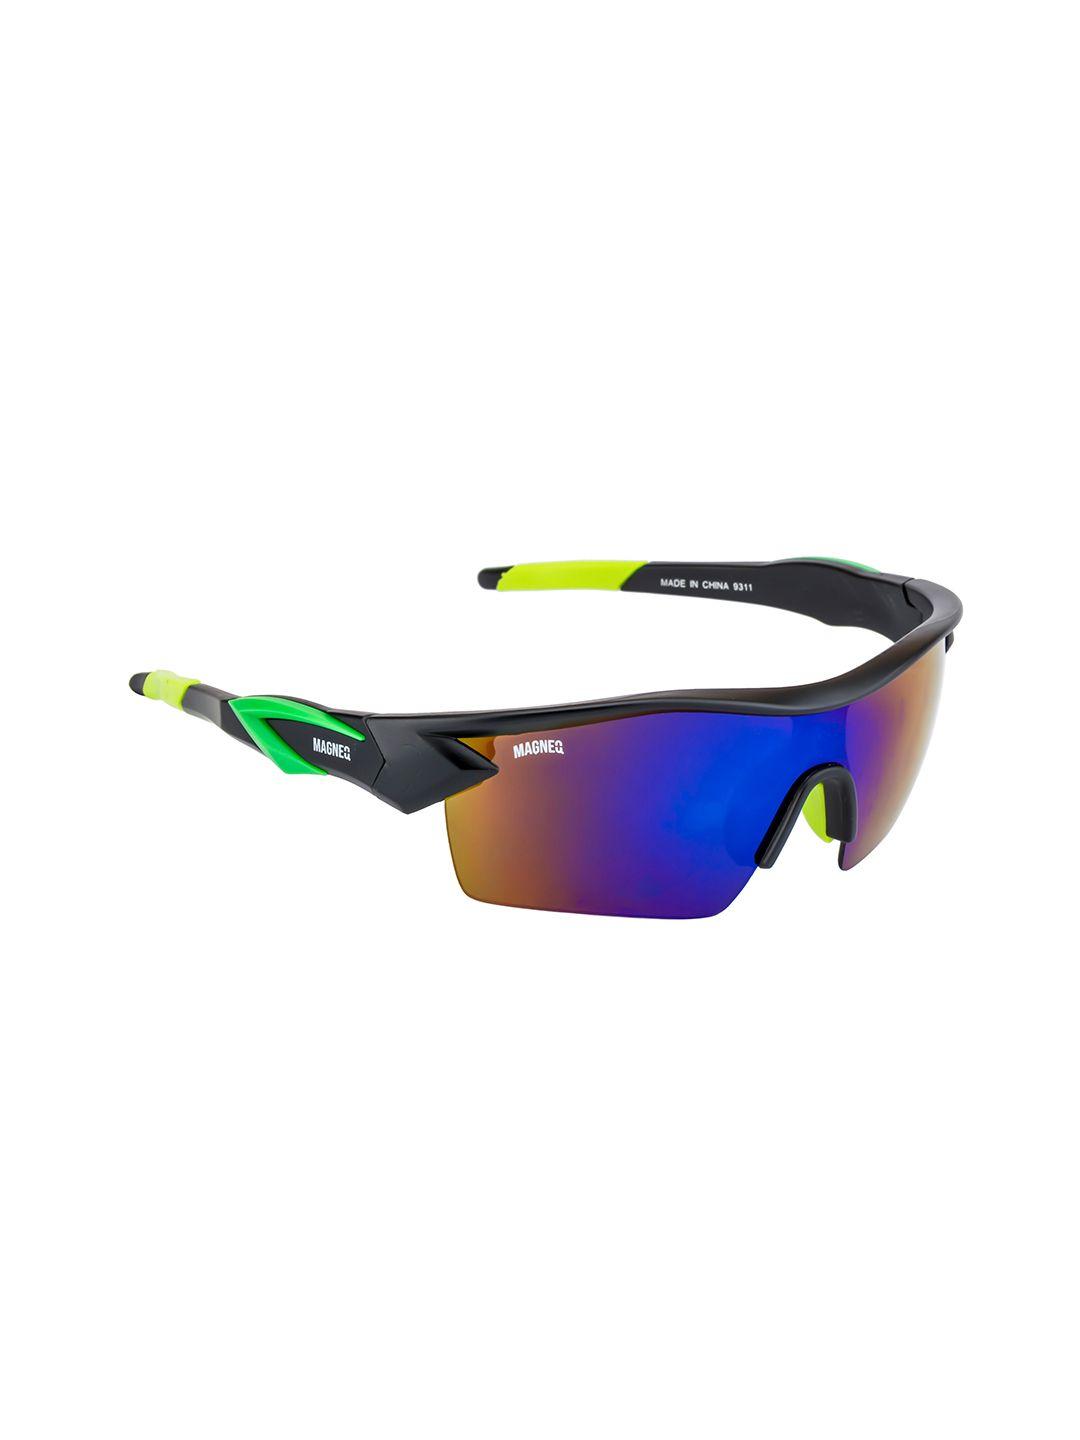 magneq unisex mirrored lens & black sports sunglasses with uv protected lens